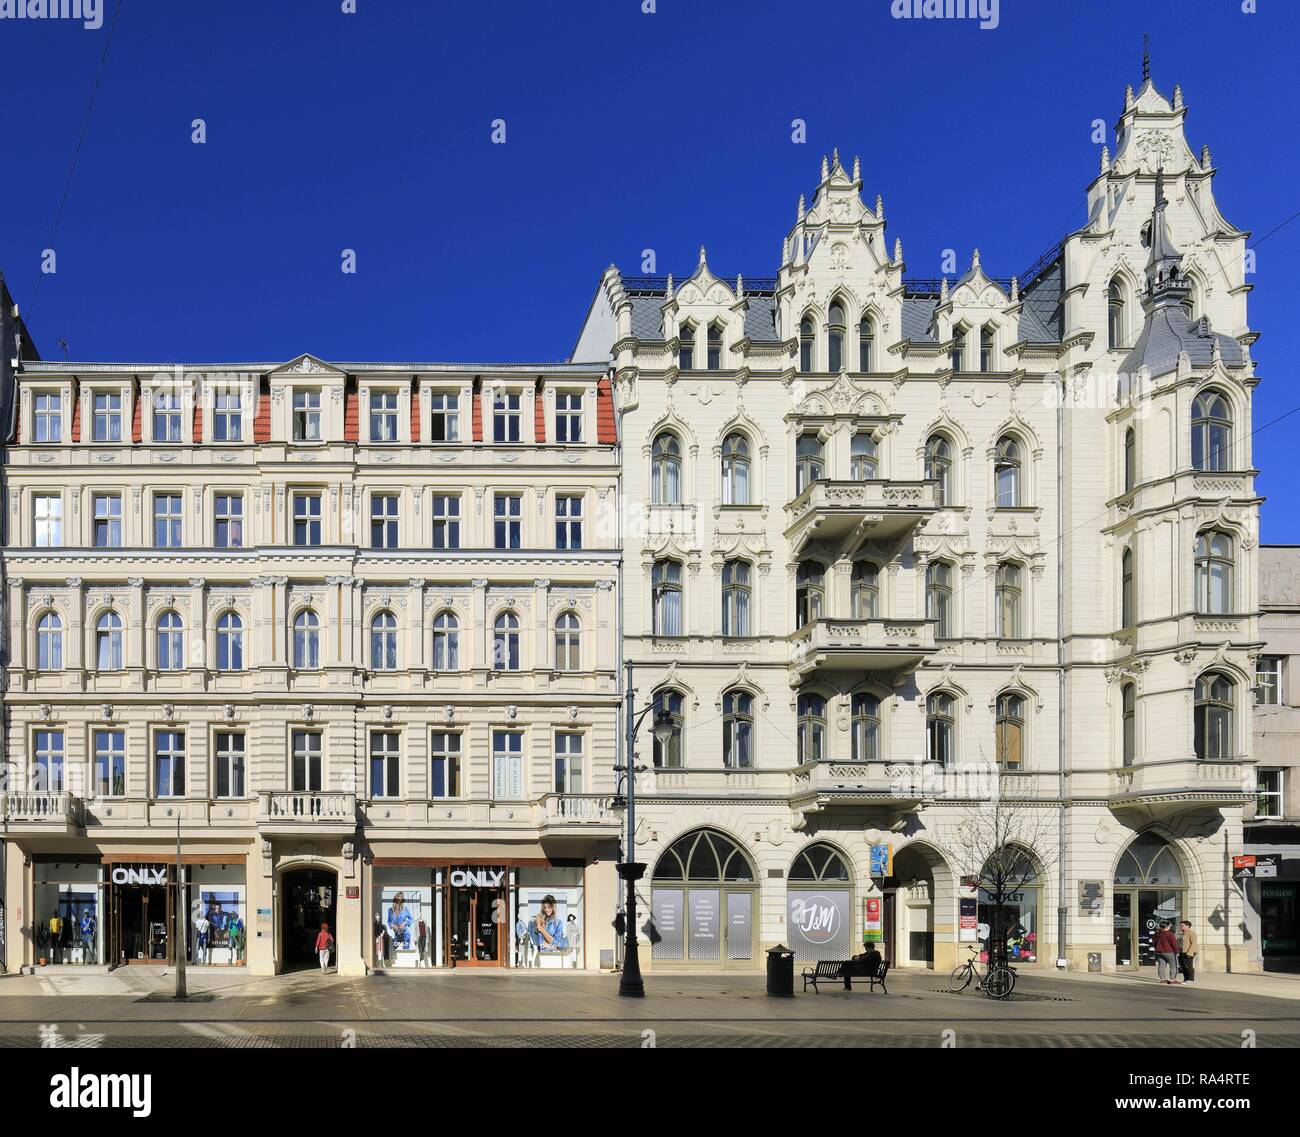 Ulica Piotrkowska High Resolution Stock Photography And Images Alamy